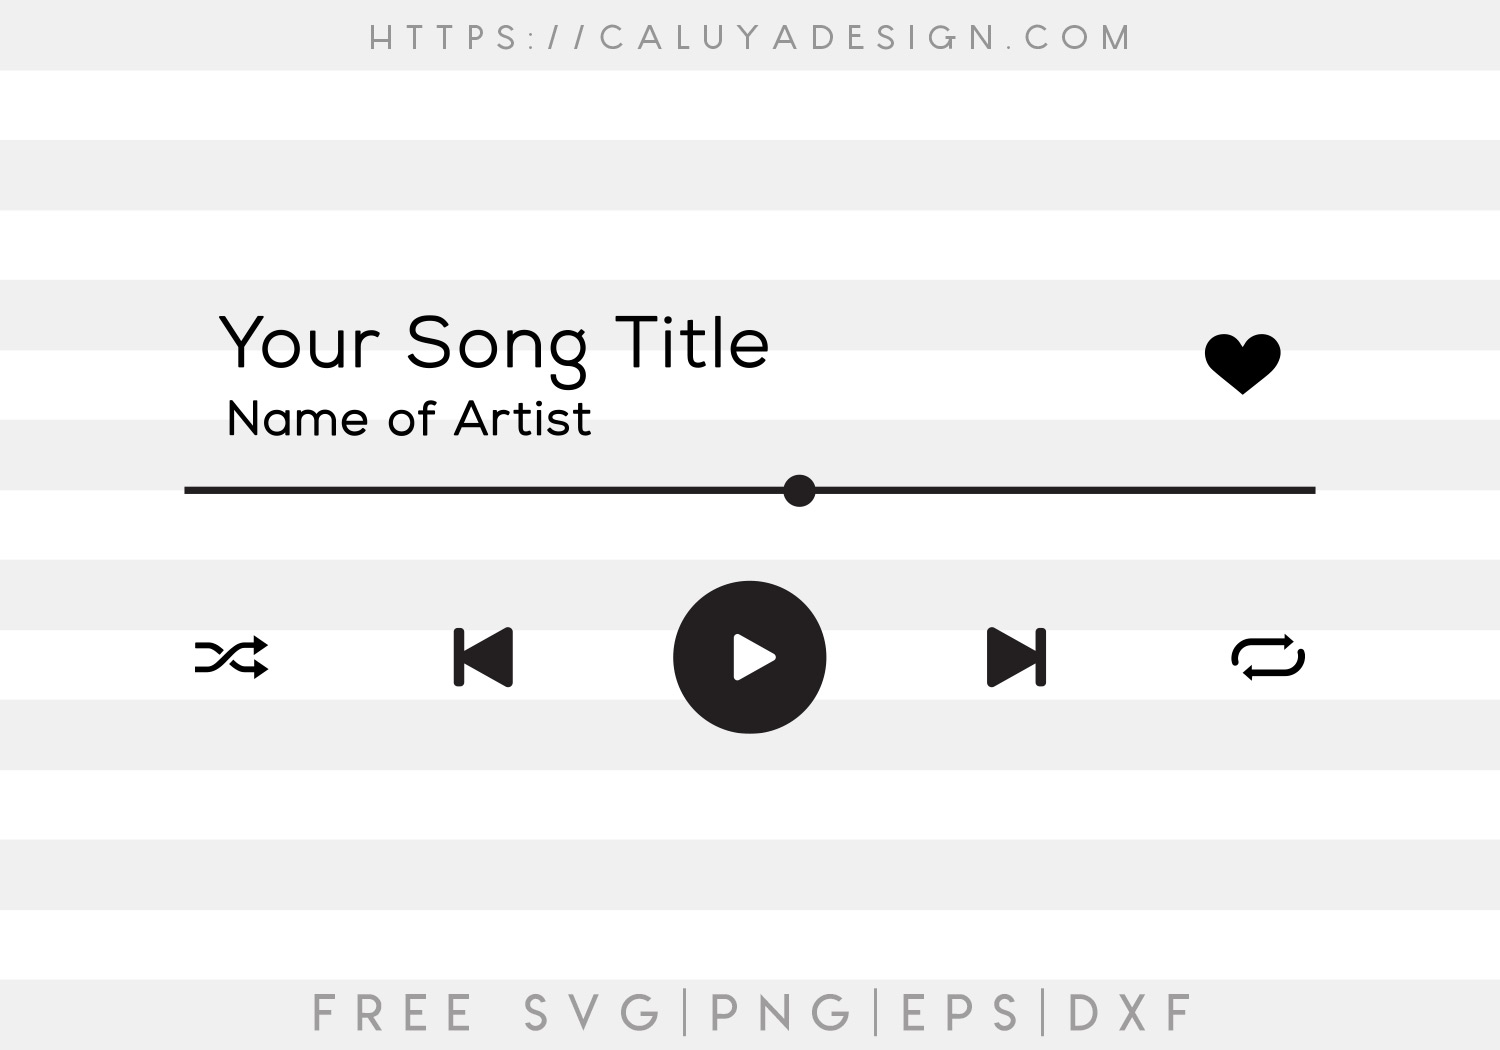 Free Playlist Template SVG, PNG, EPS & DXF by Caluya Design